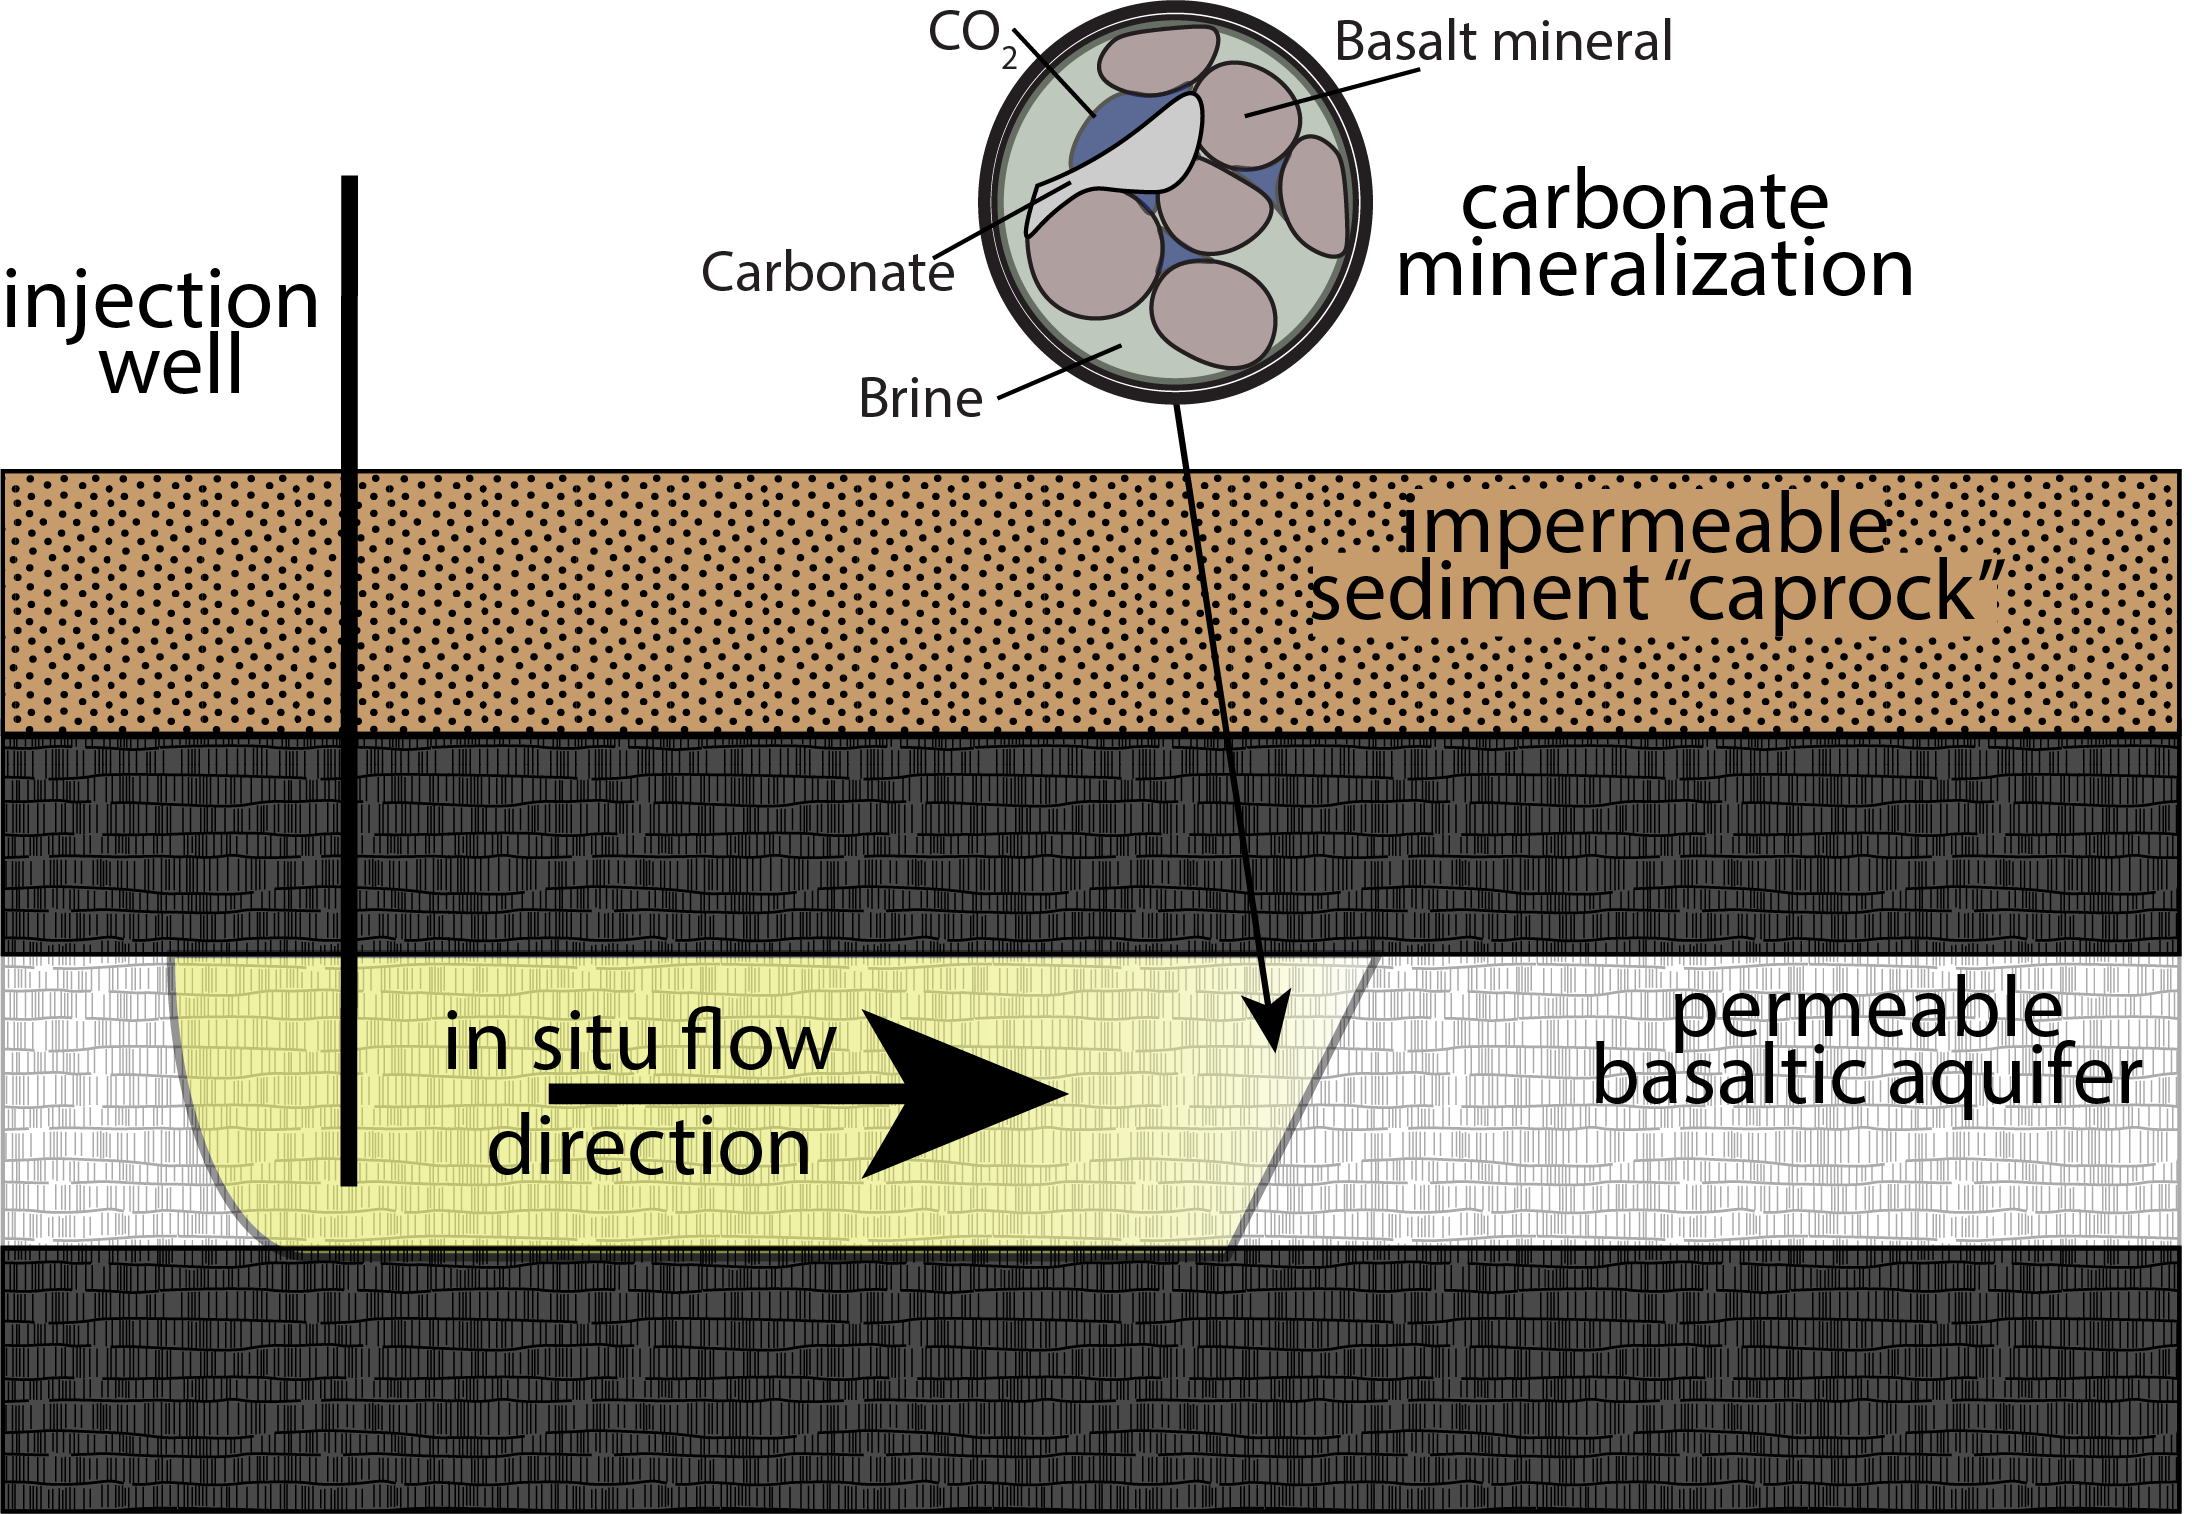  Carbon mineralization during the Solid Carbon process. CO2 (yellow) is injected into the basaltic aquifer, where it reacts with the basalt to become rock. (Credit: Solid Carbon)